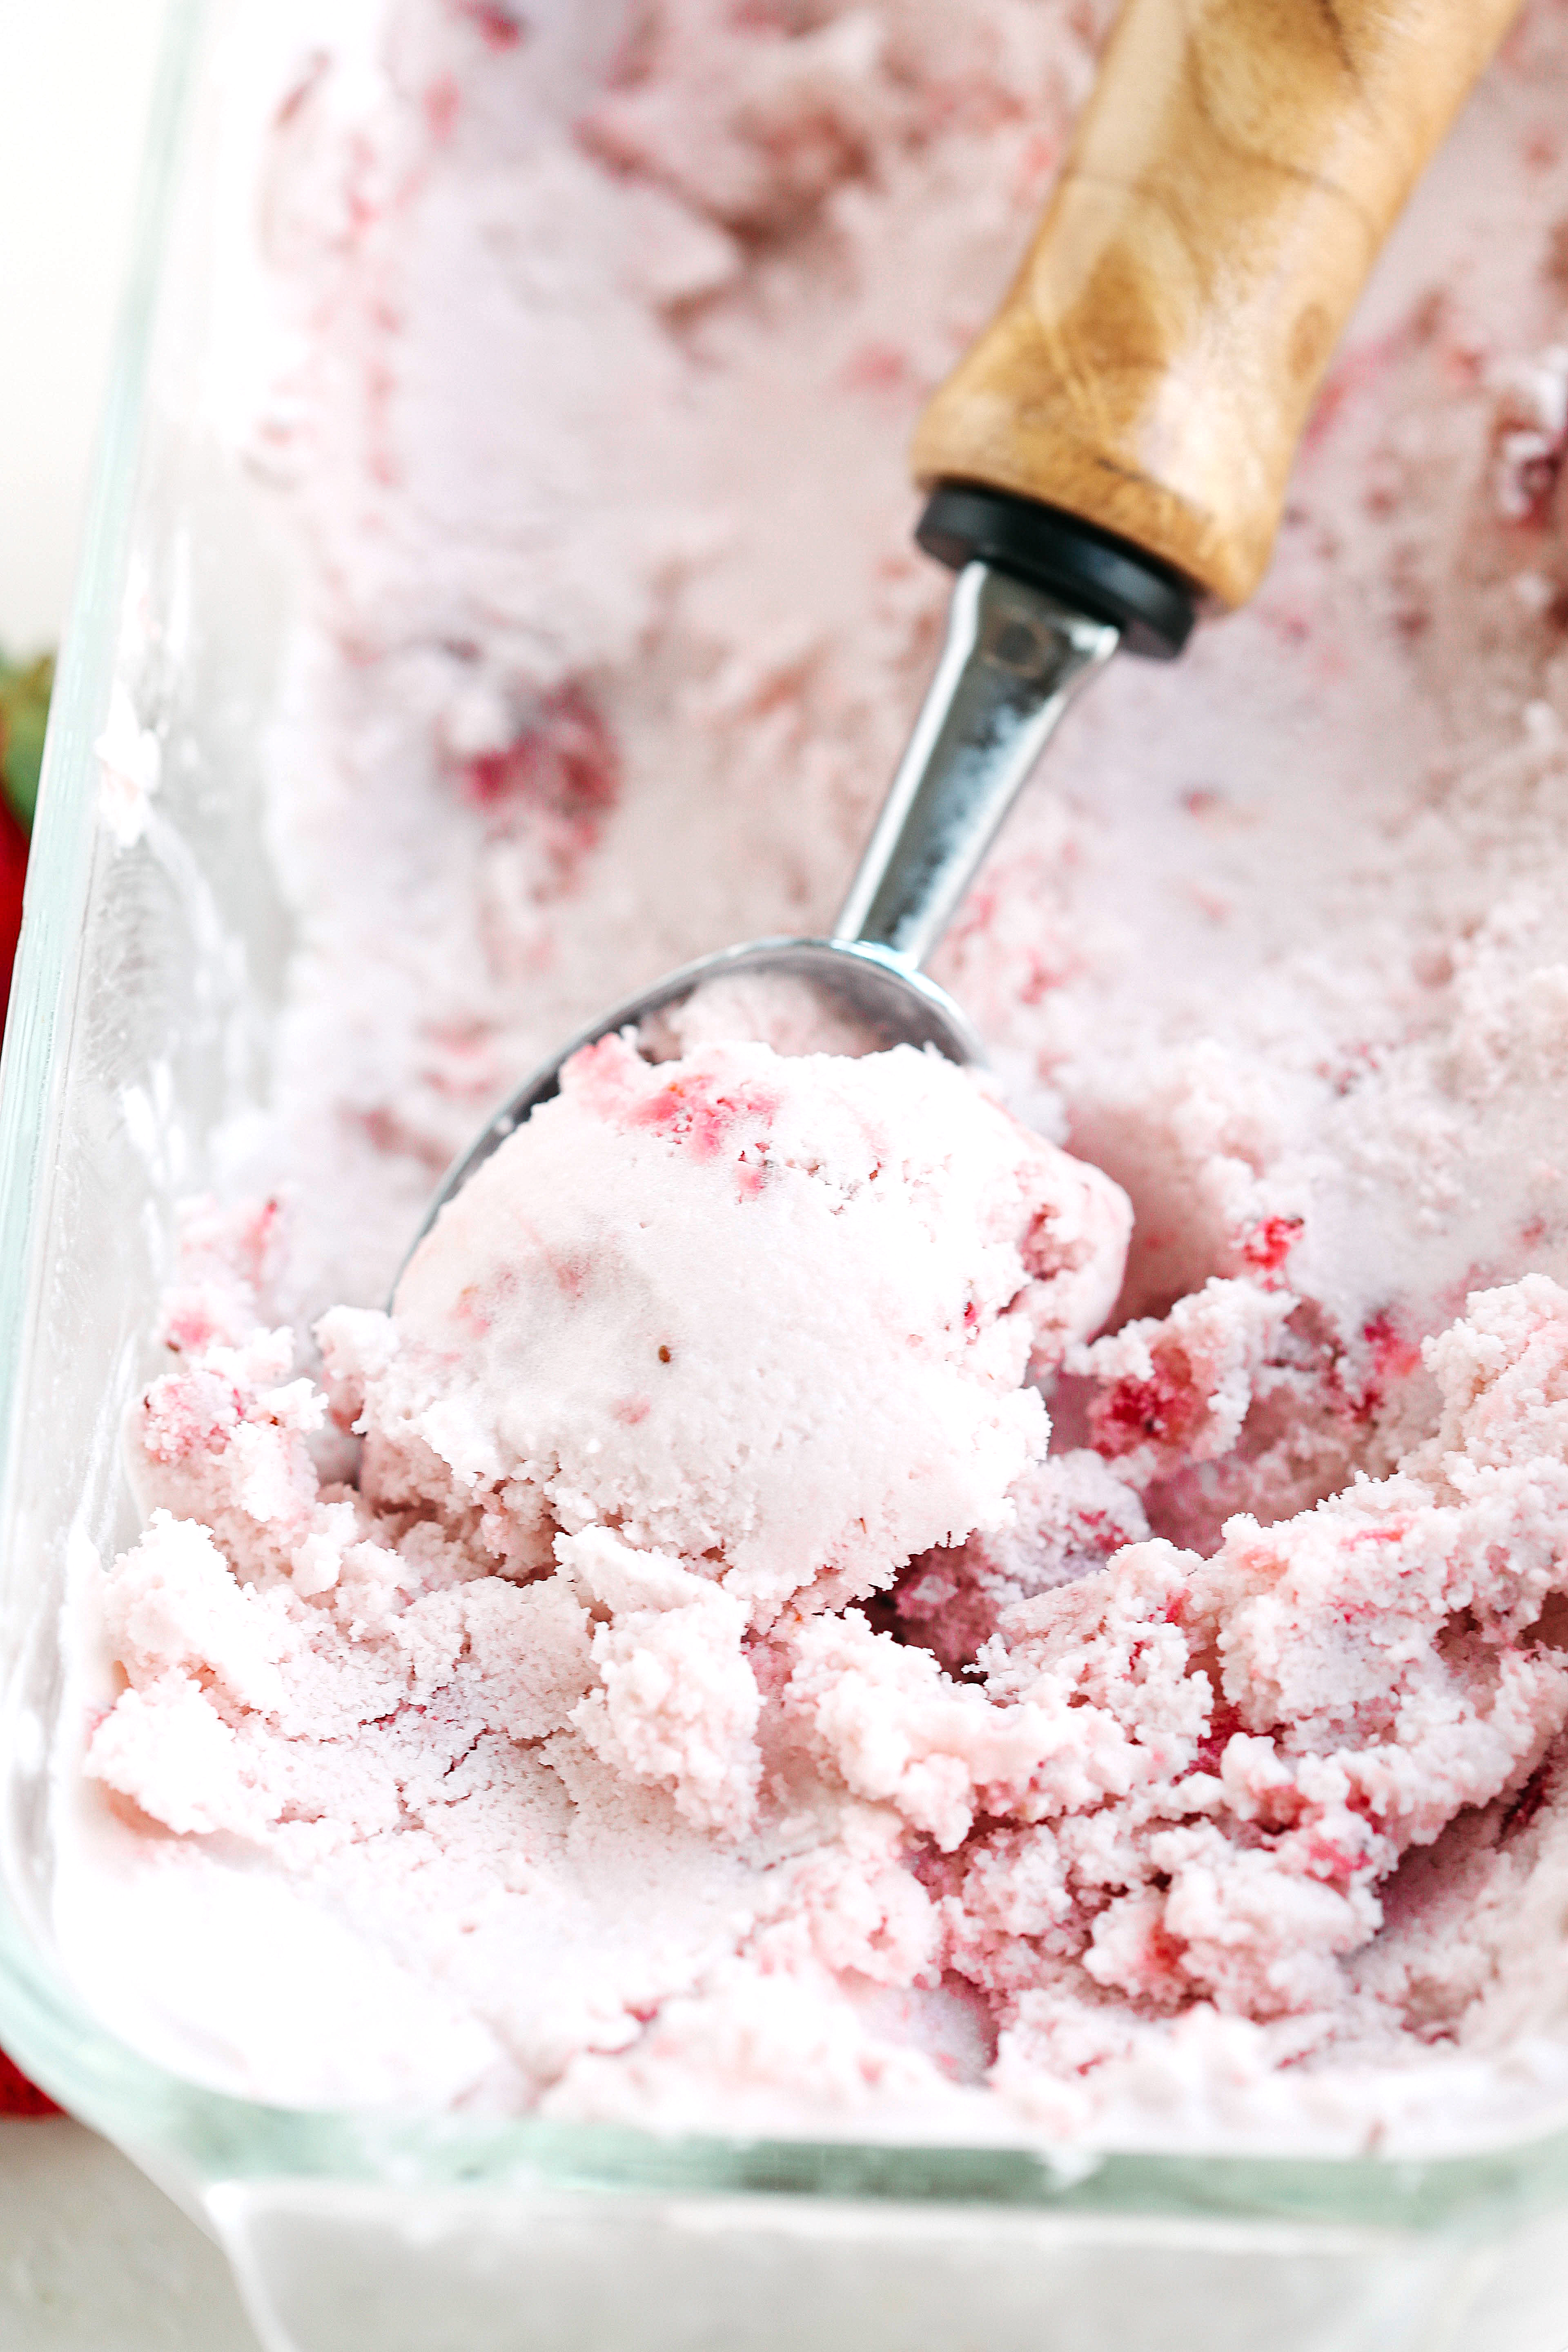 Perfectly sweet and creamy Balsamic Roasted Strawberry Ice Cream that is gluten-free and dairy-free with big chunks of strawberry in every bite!